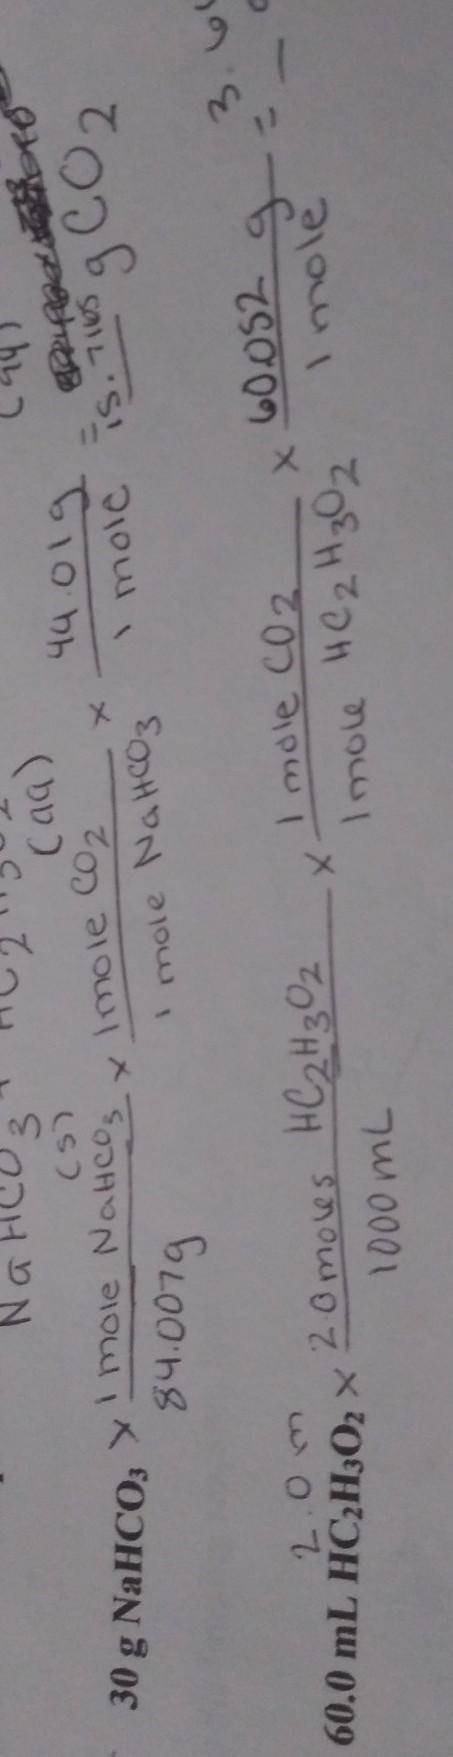 am i solving these right. i dont know if im suppose to divide by 1 mole or convert it and divide by